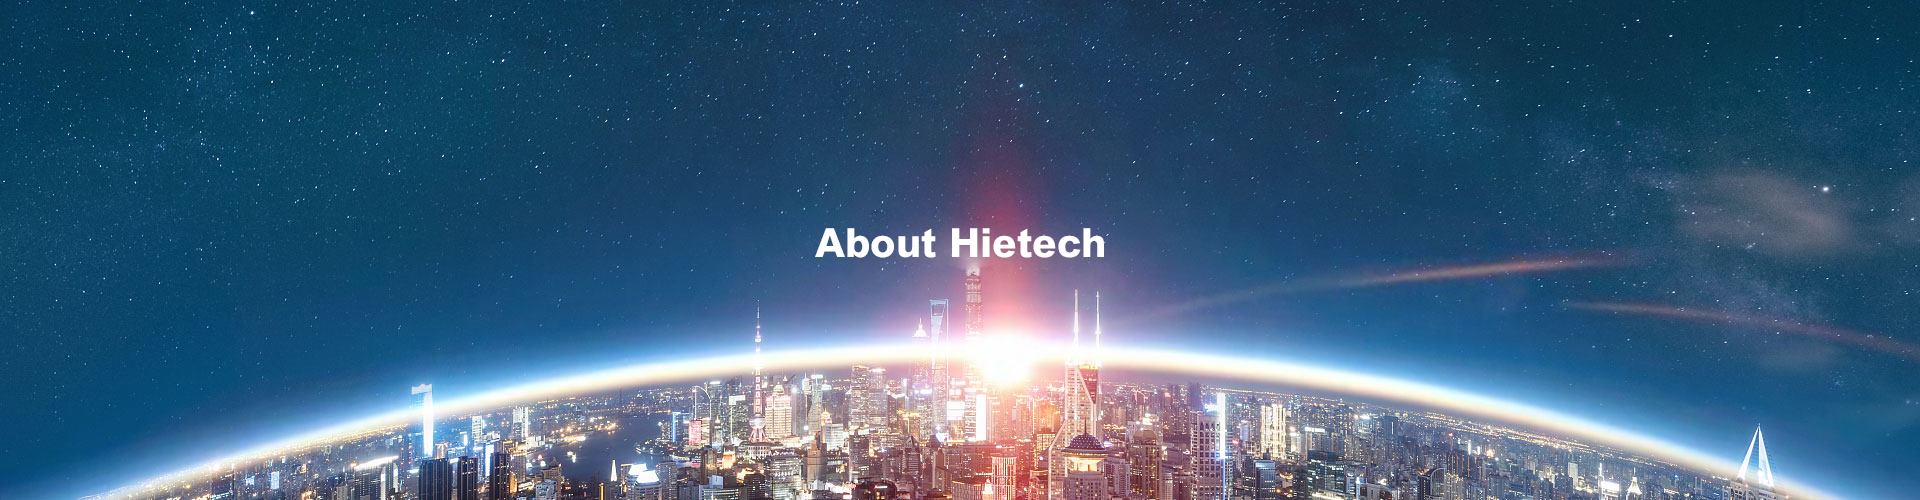 Hietech is an industry-leading facility smart loT enterprise with more than 17 years of industry experience in the field of energy and facilities. lt is committed to providing users with the most reliable intelligent facilities lot services, helping enterprise users develop their business and creating incremental value.